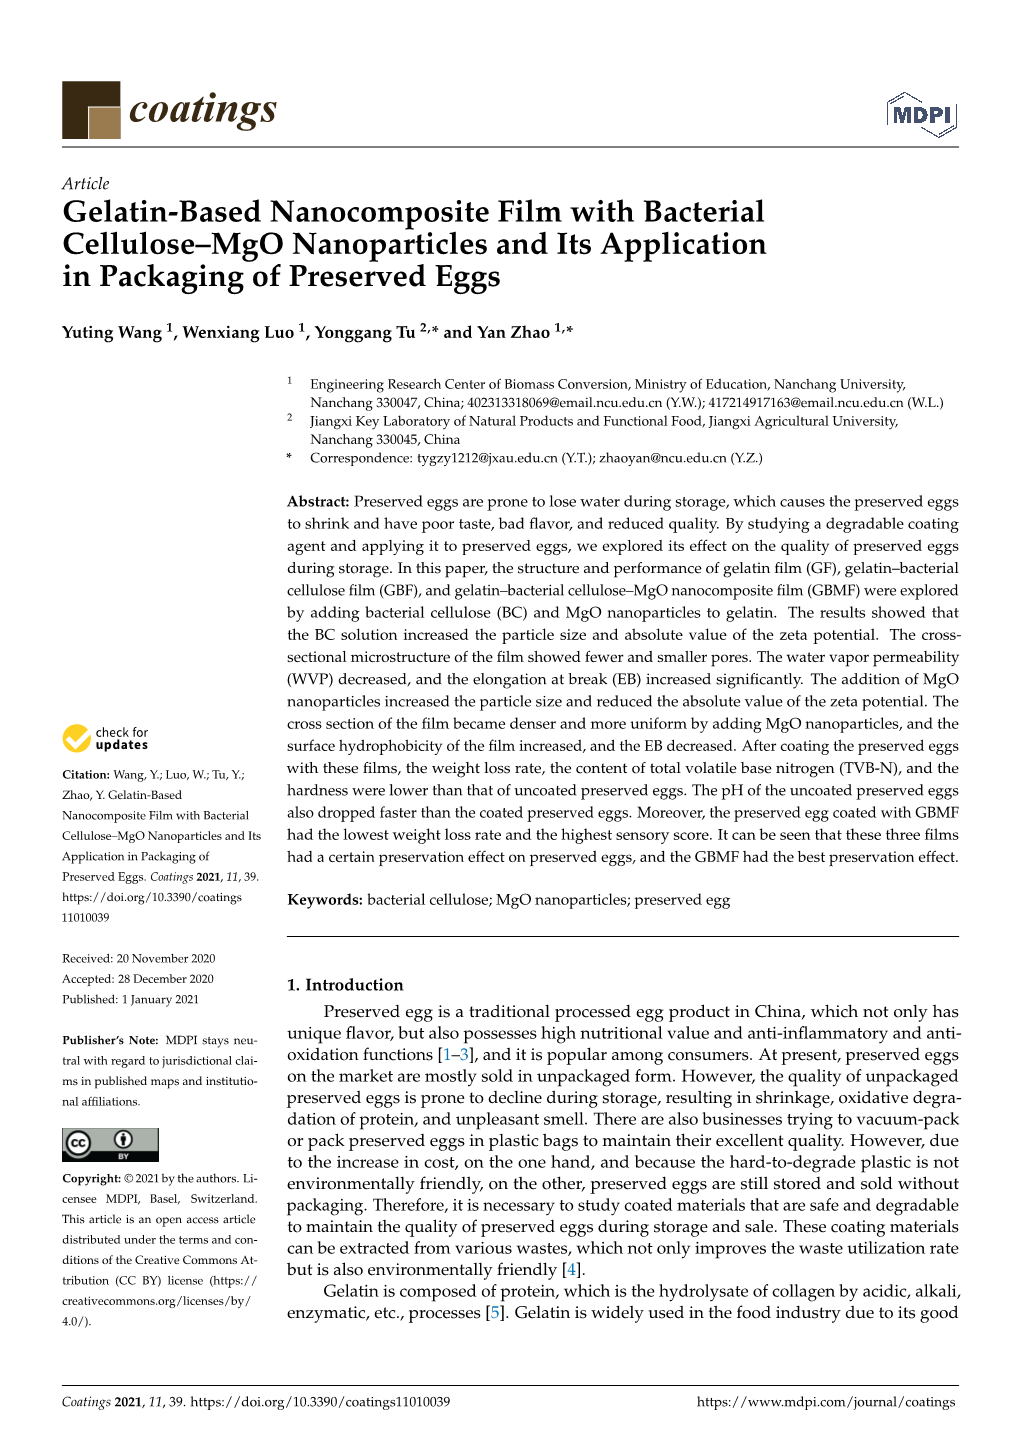 Gelatin-Based Nanocomposite Film with Bacterial Cellulose–Mgo Nanoparticles and Its Application in Packaging of Preserved Eggs